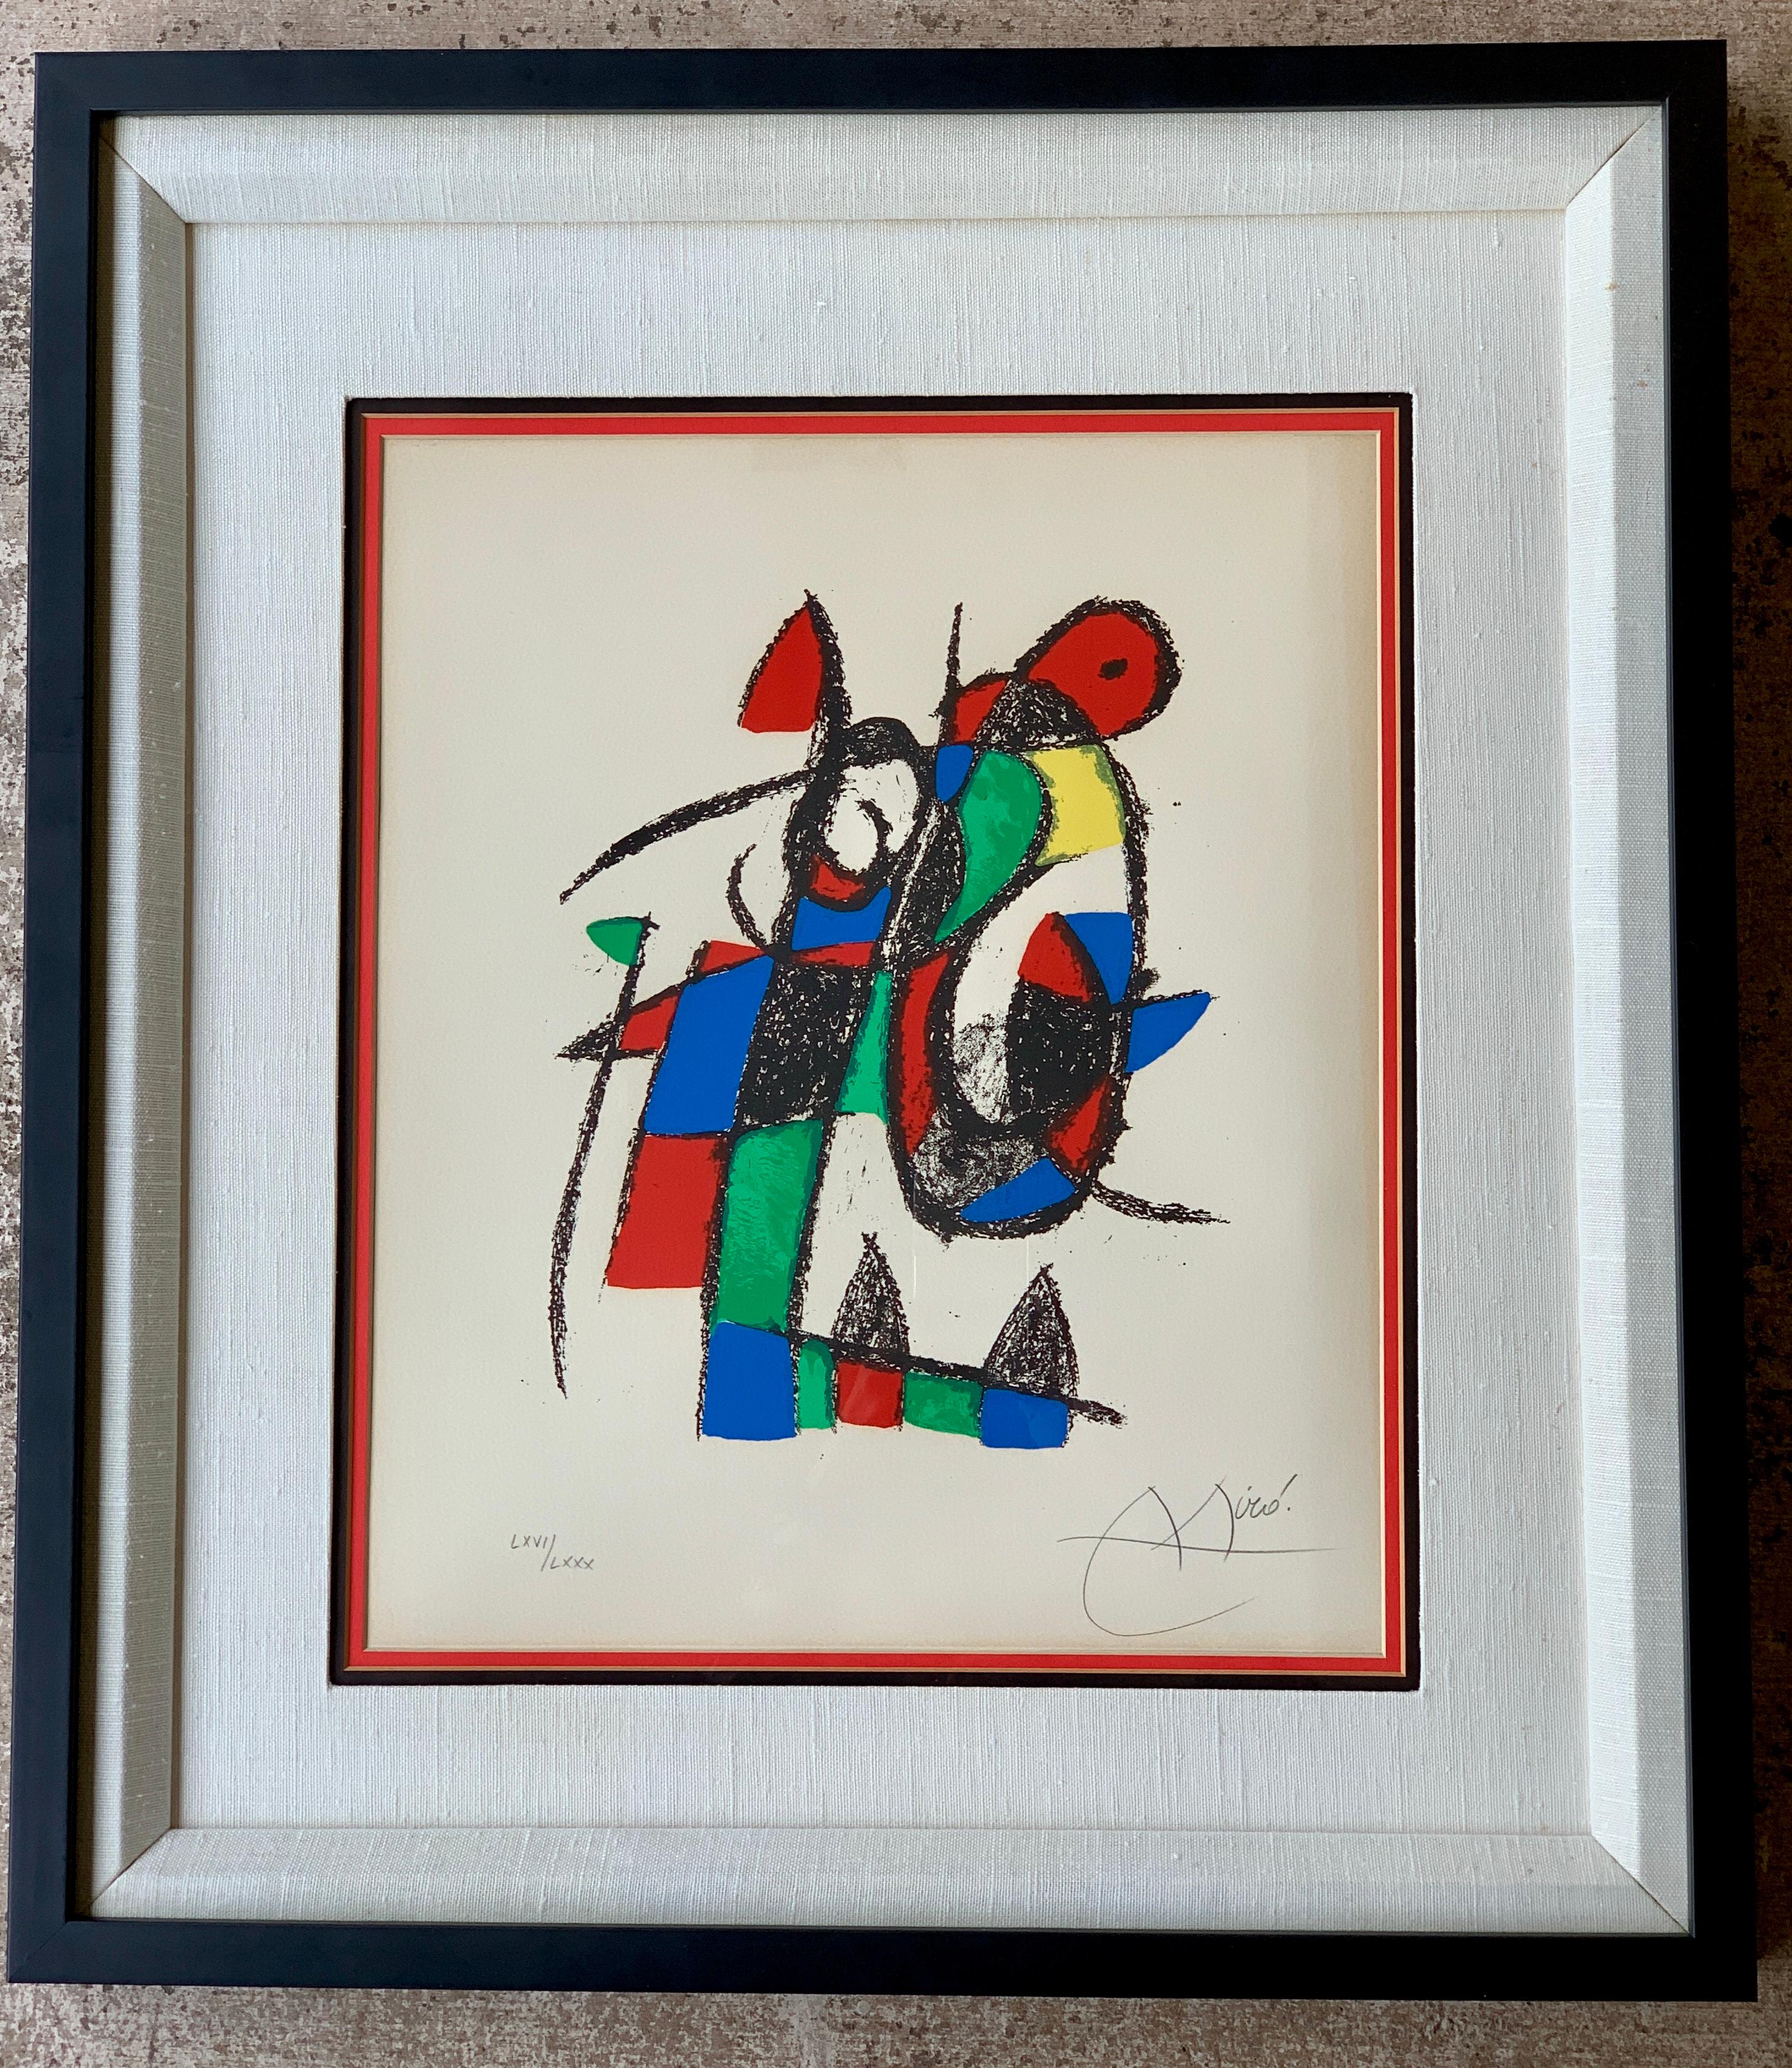 Collectible hand signed and numbered lithograph from the 